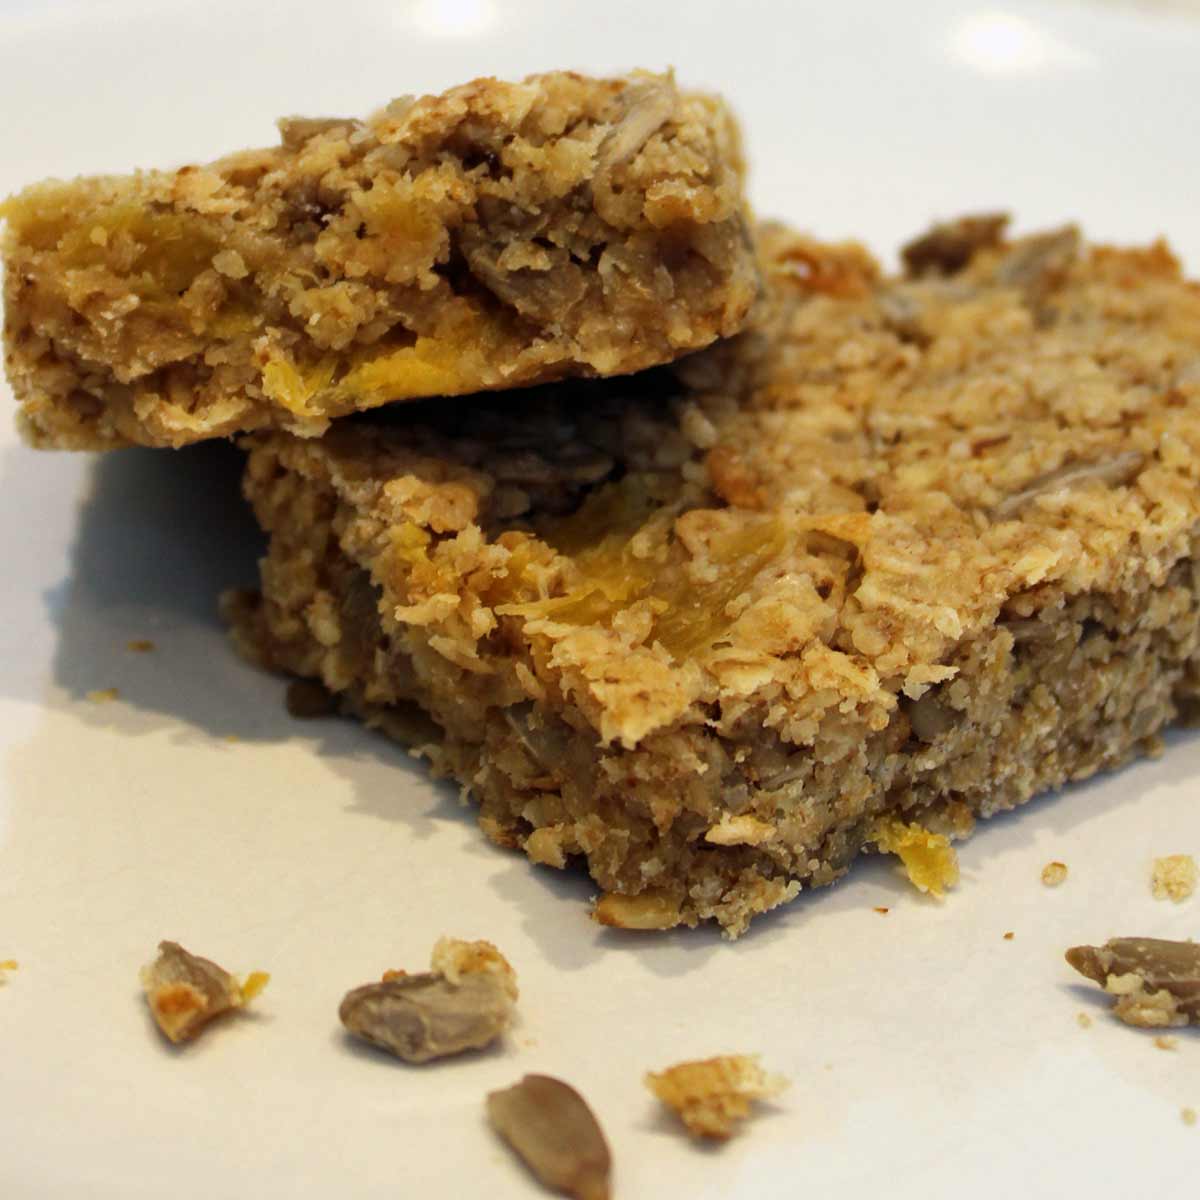 Gluten-free and sugar-free pineapple, ginger and oat bars